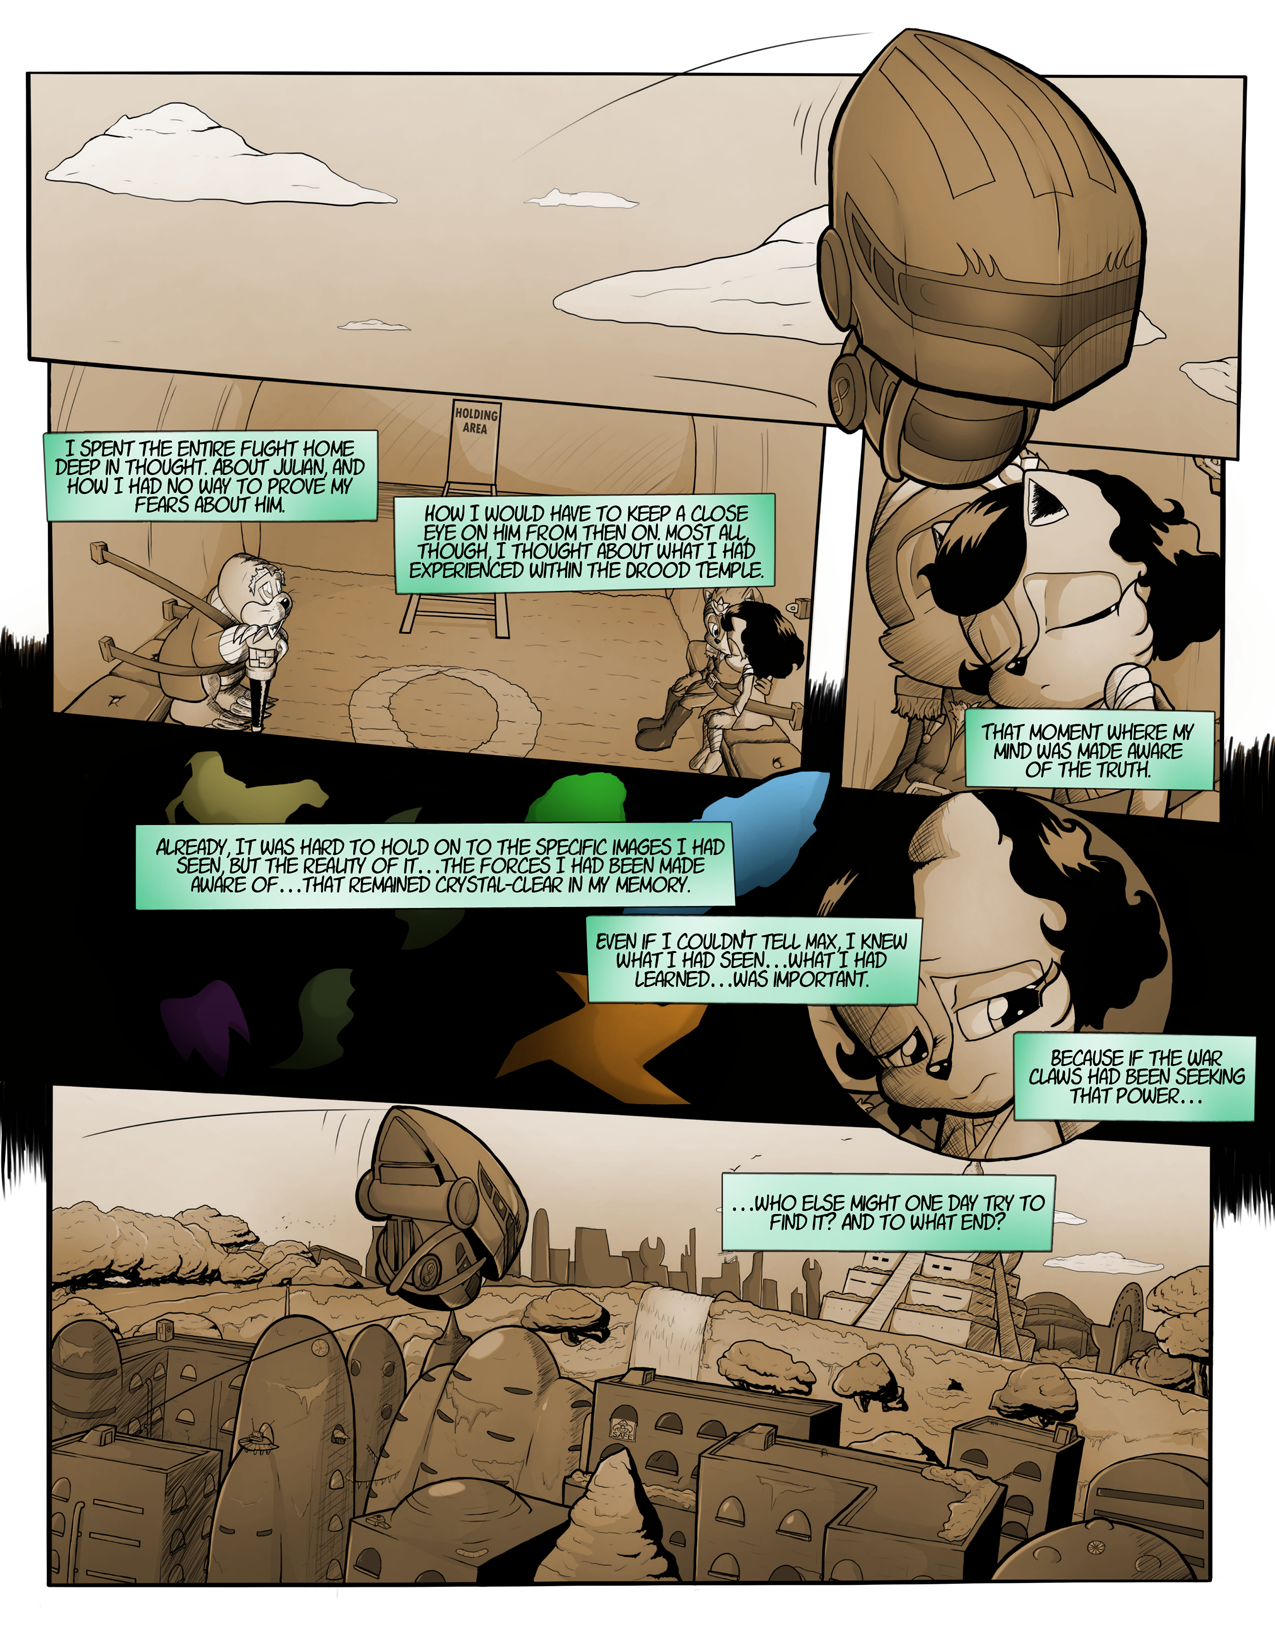 Chapter 5, page 35